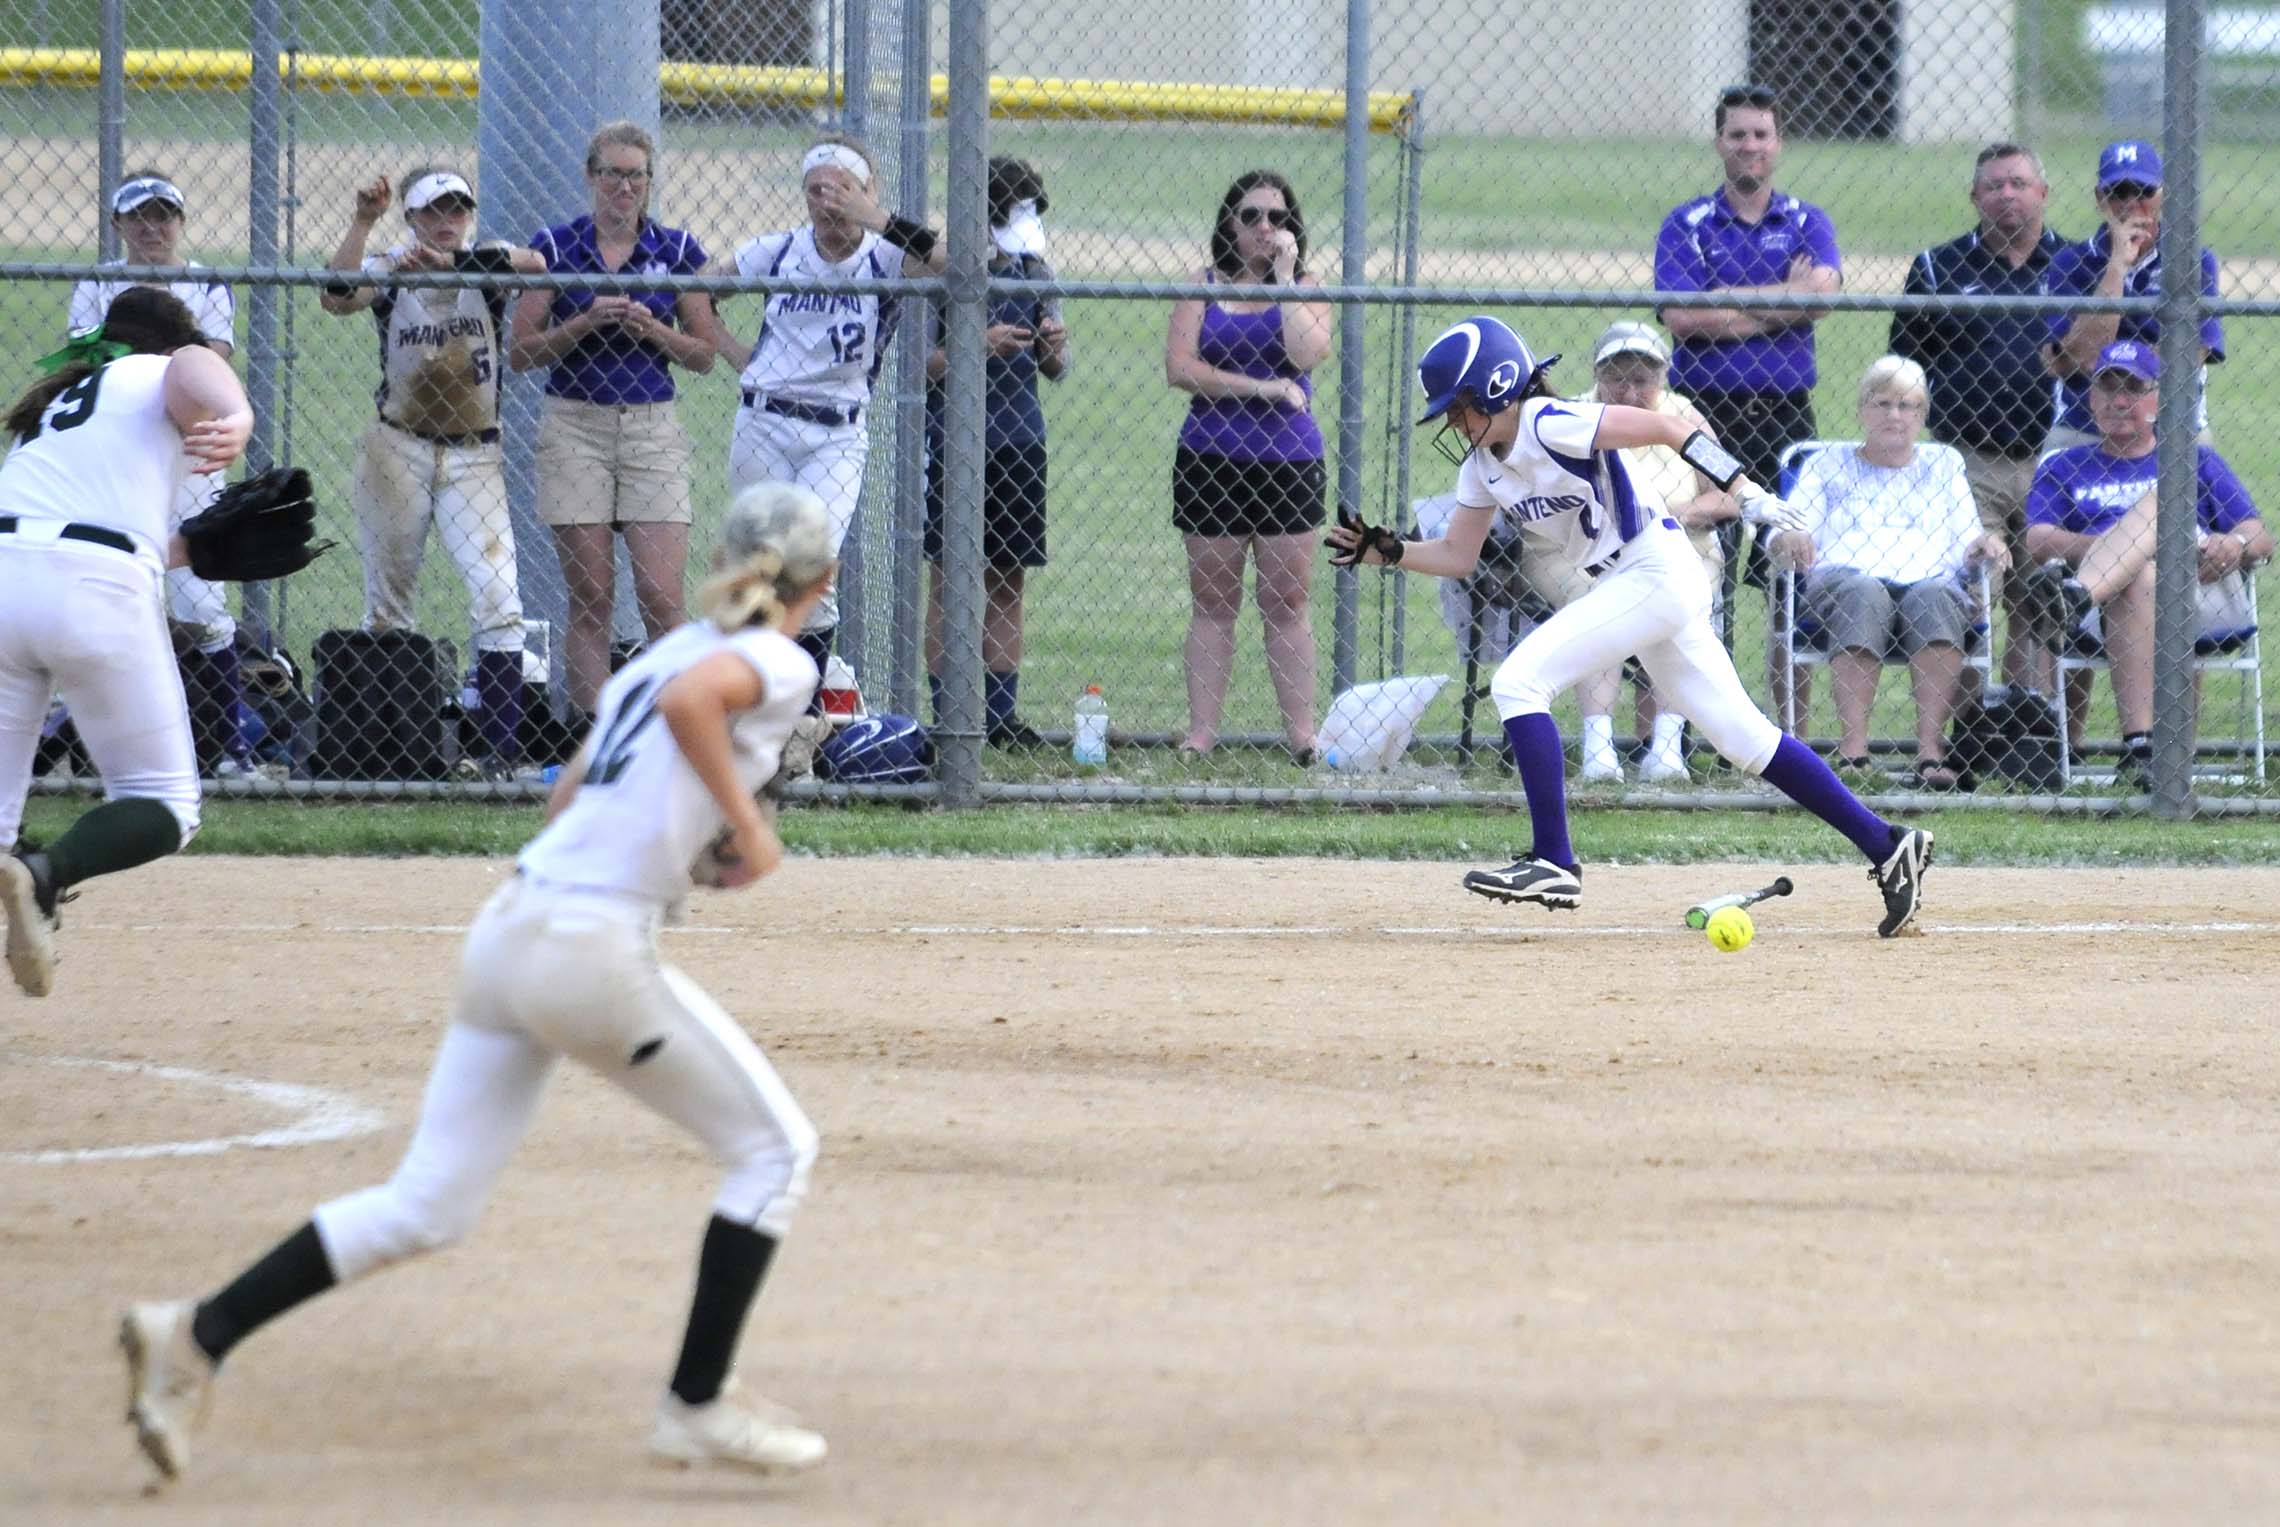  Manteno player Karlie Wenzel runs to first after a bunt hit Tuesday during a game against Providence Catholic.     